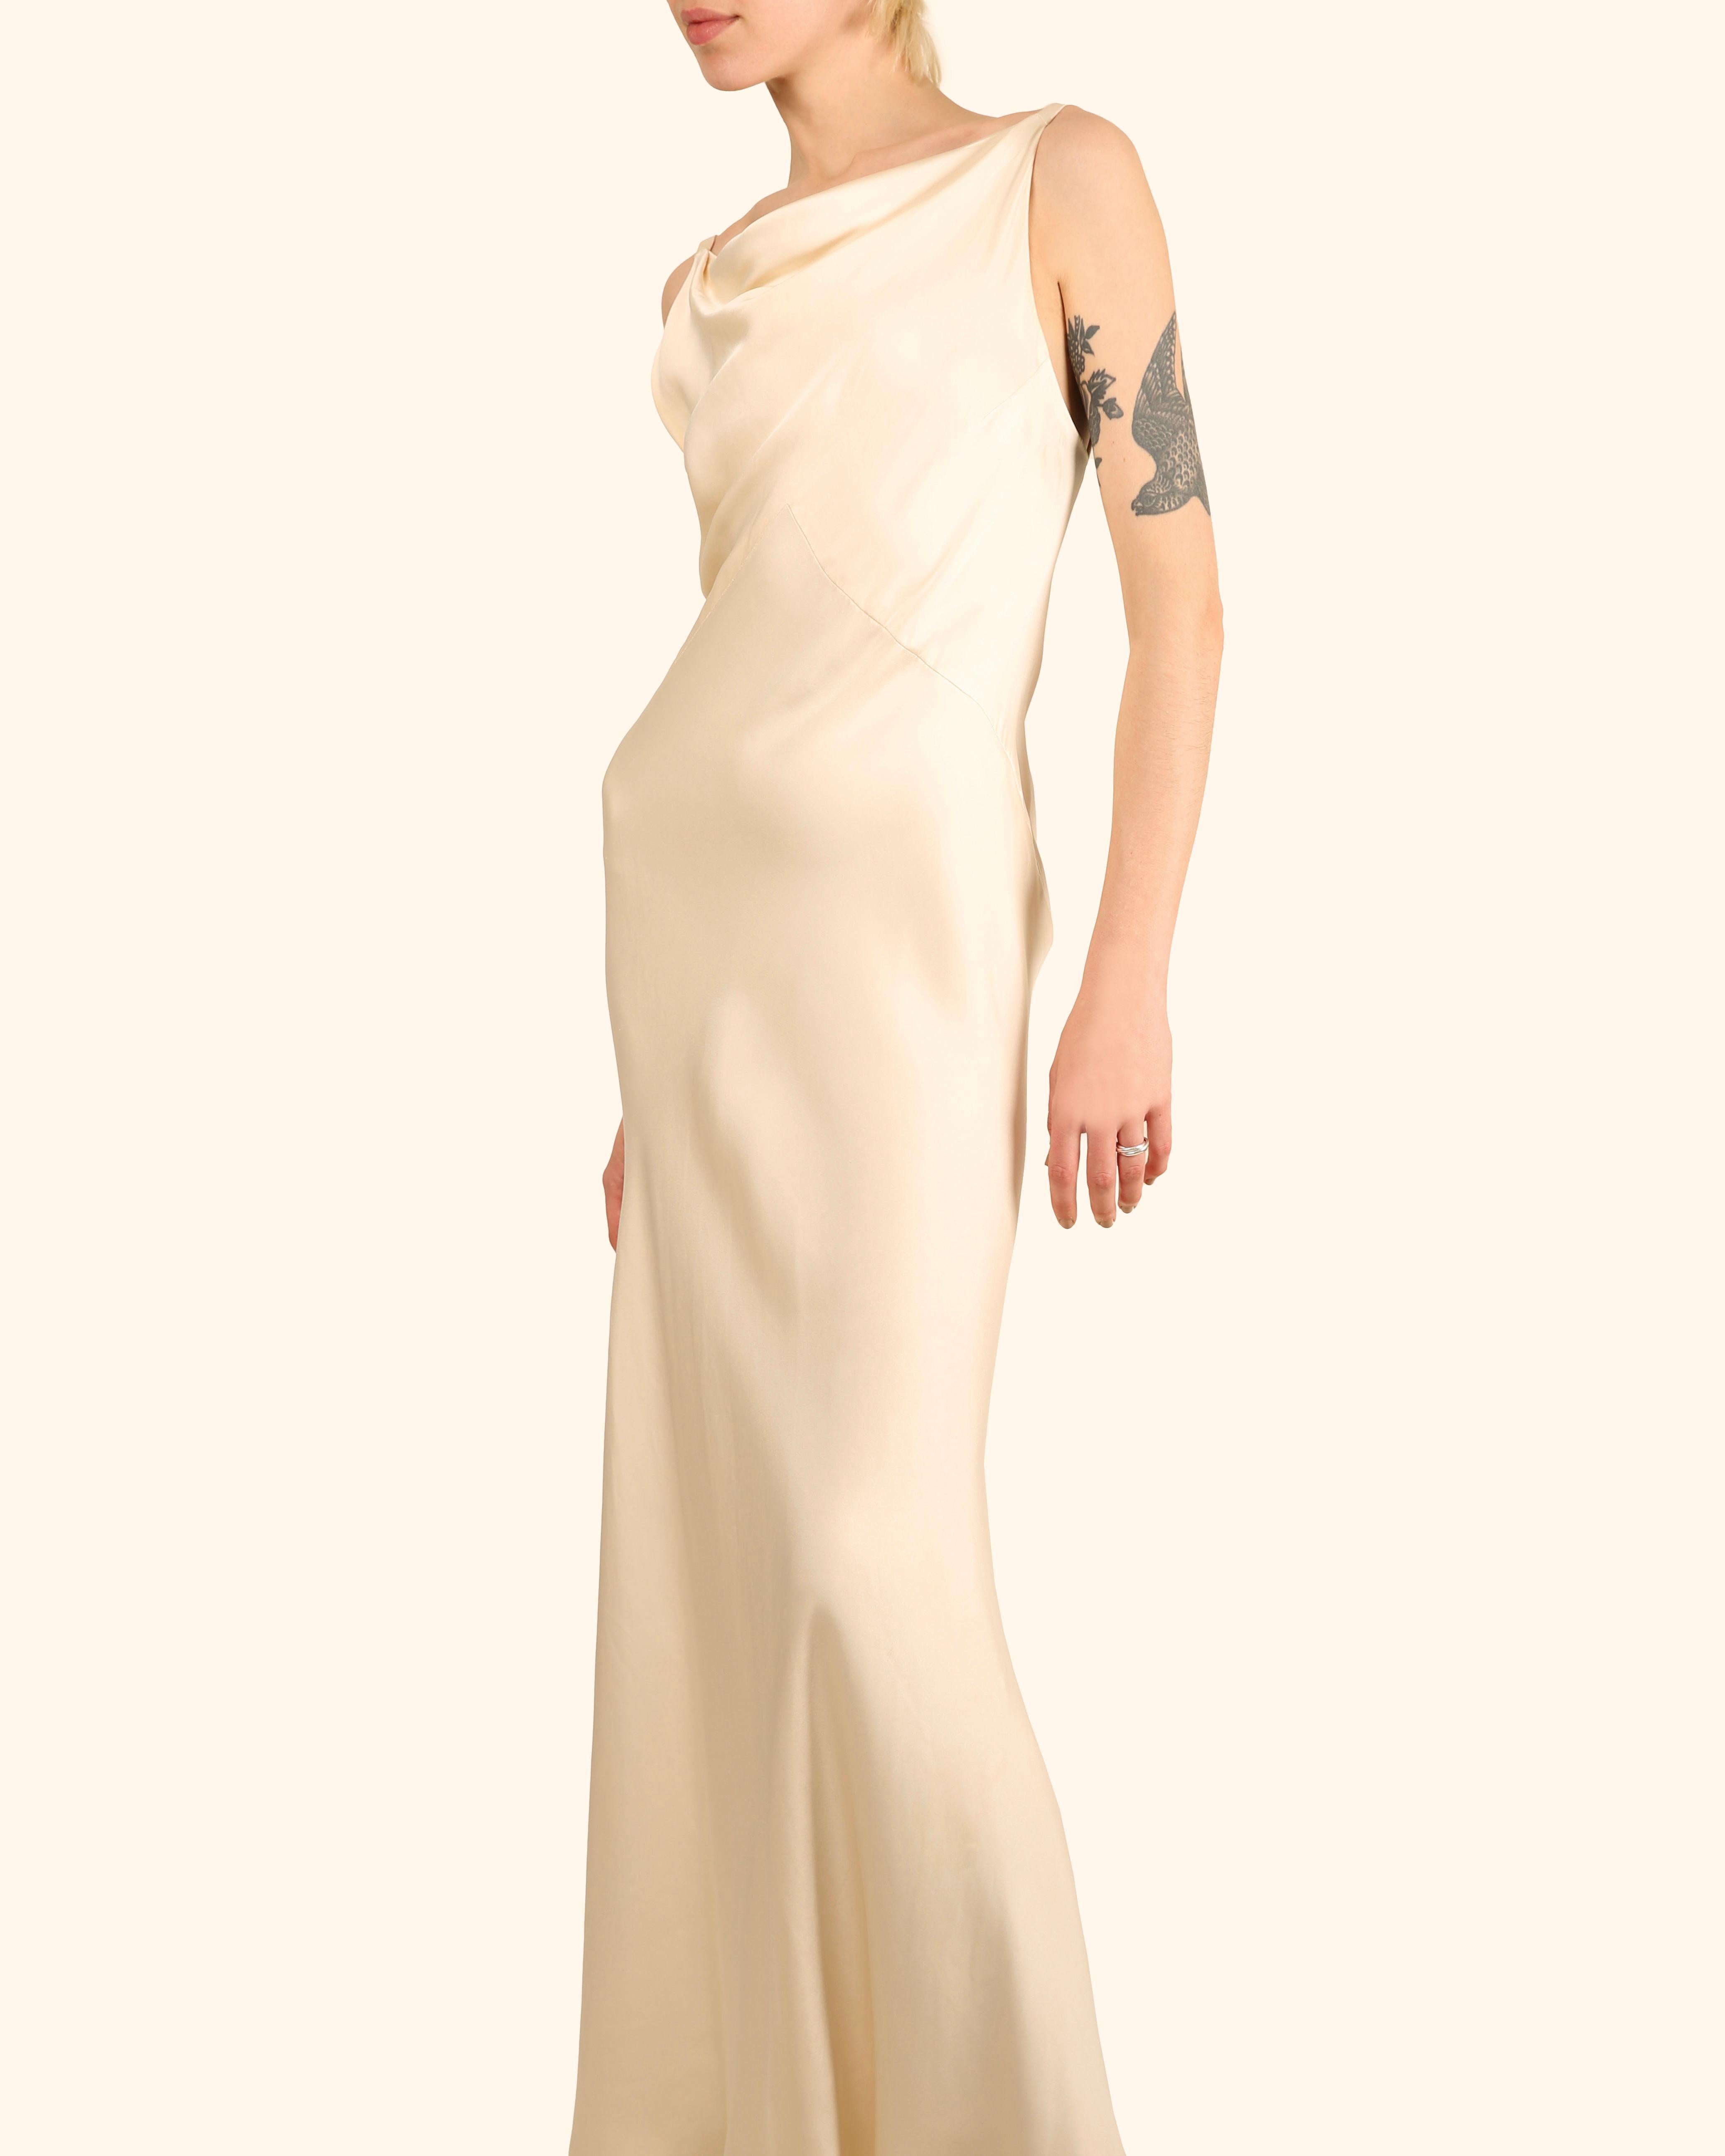 Ralph Lauren champagne bias cut backless silk slip style backless gown dress For Sale 7